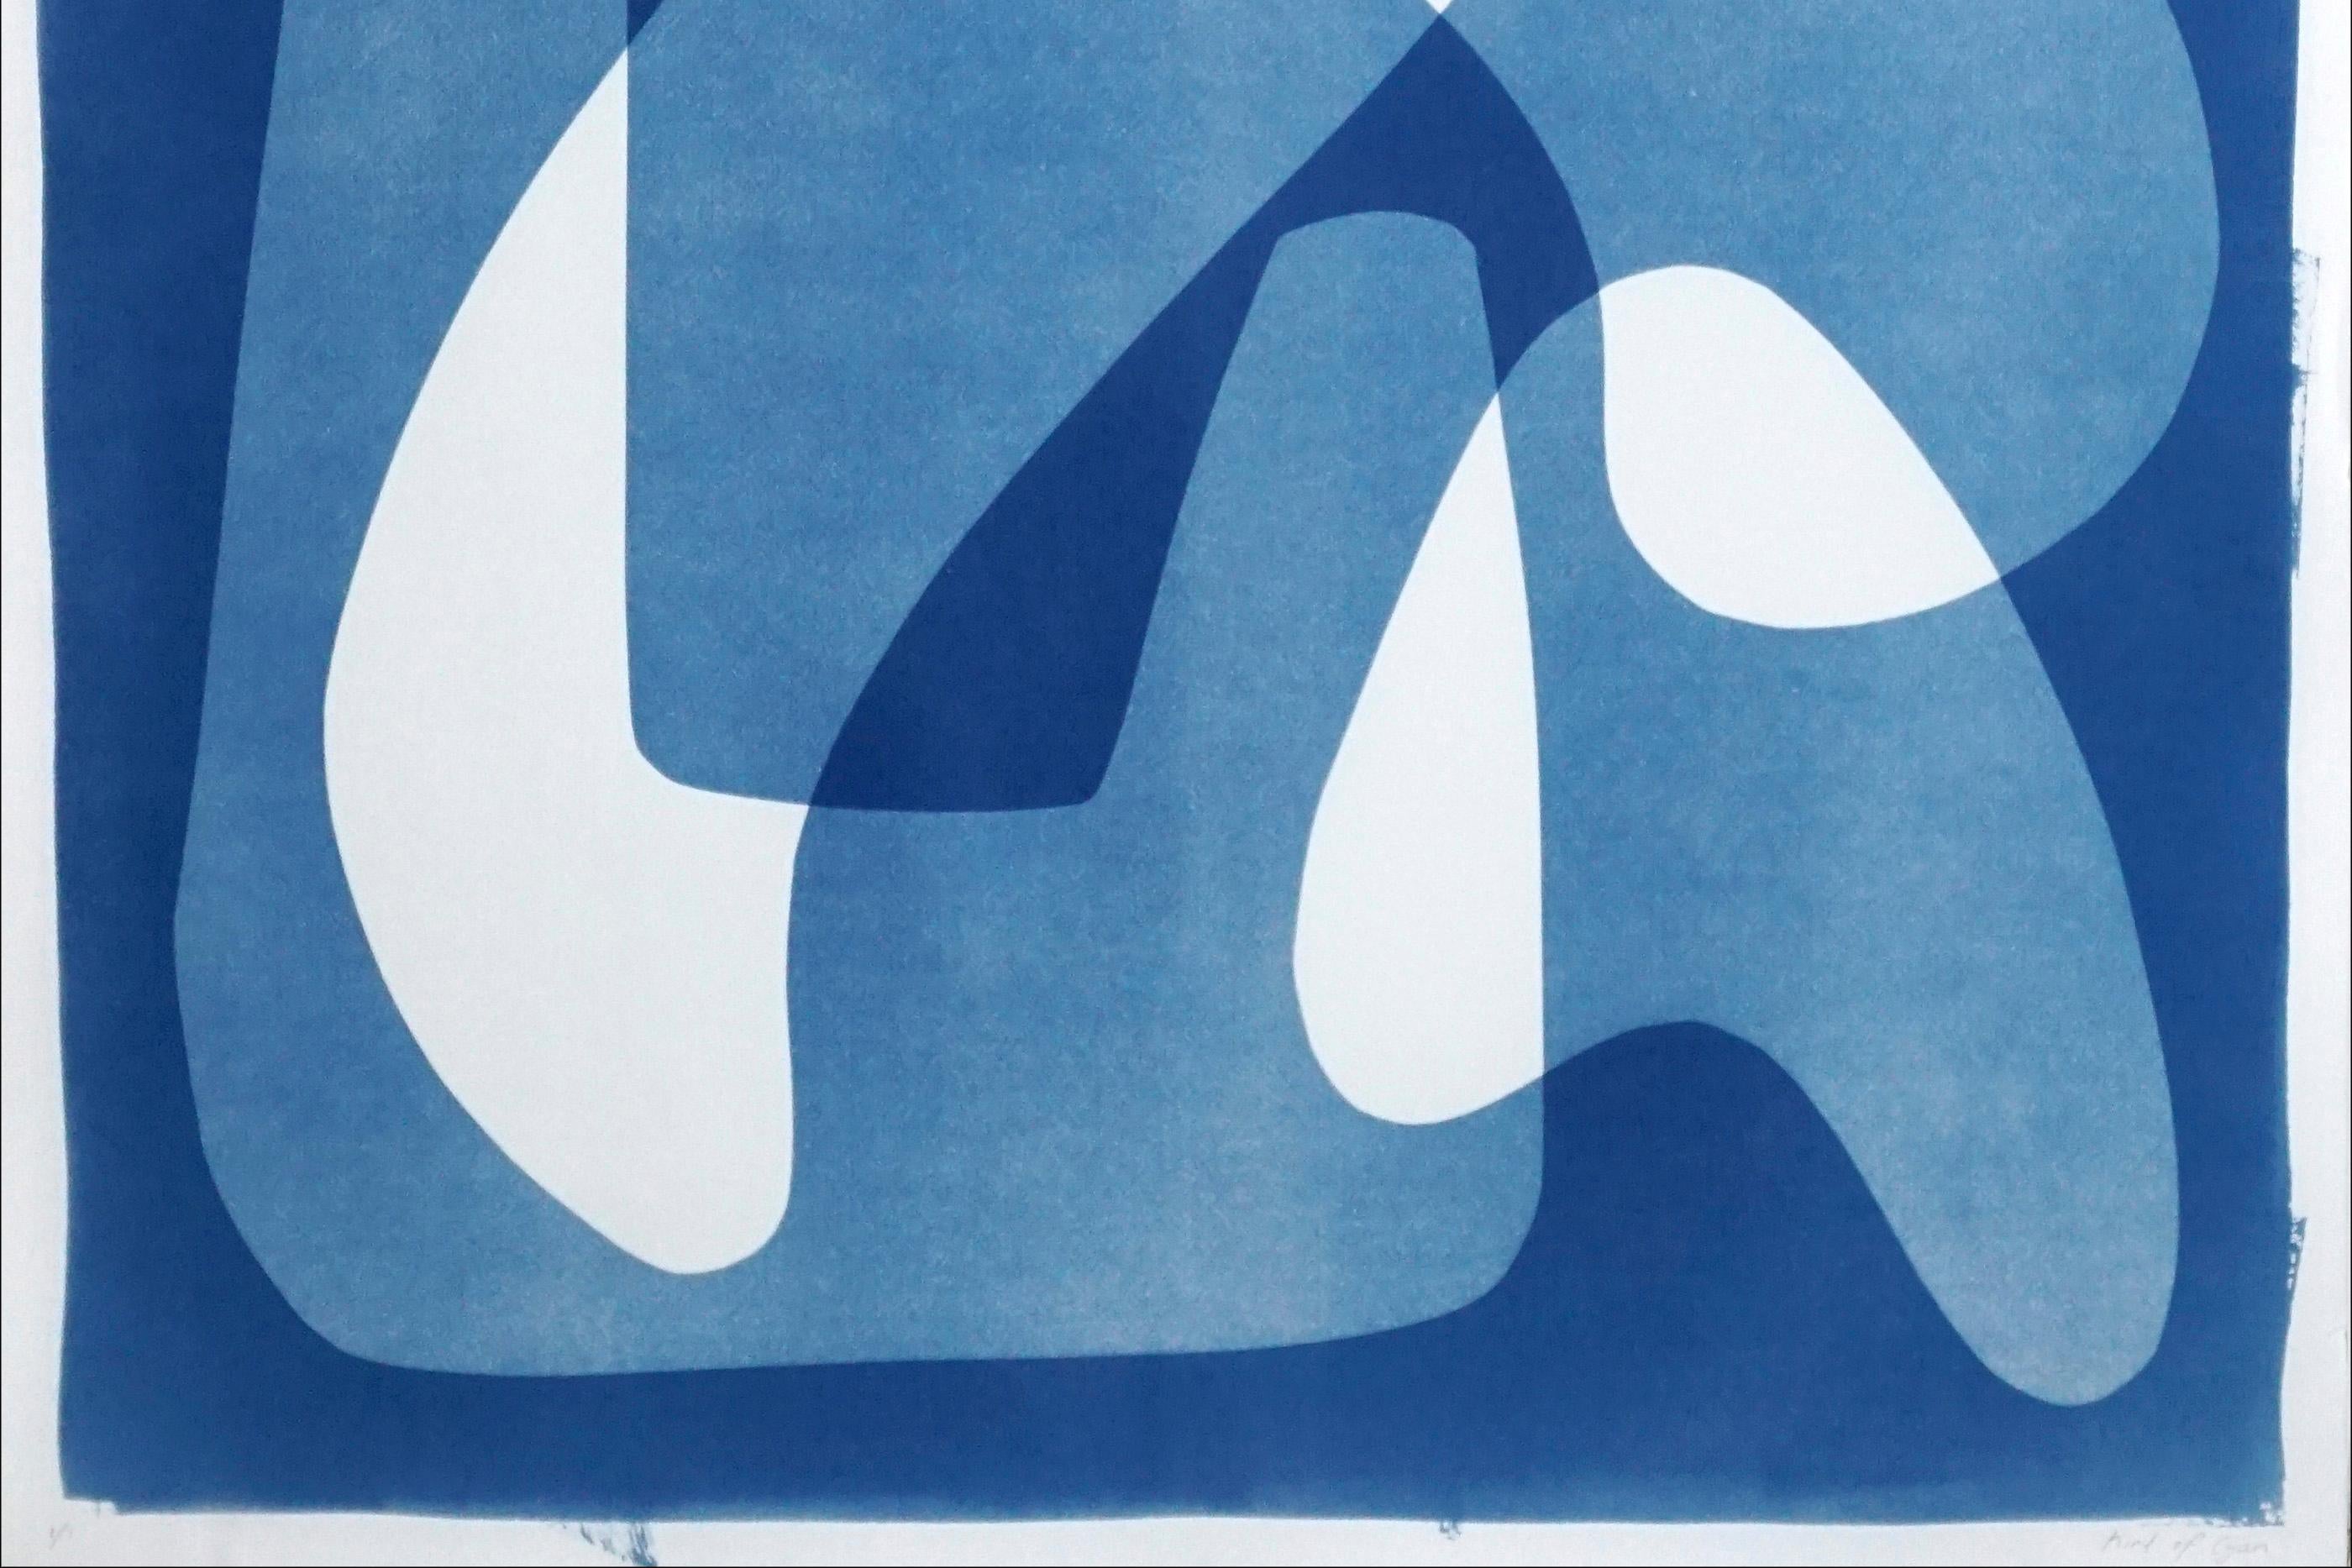 This is an exclusive handprinted unique cyanotype that takes its inspiration from the mid-century modern shapes.
It's made by layering paper cutouts and different exposures using uv-light. 

Details:
+ Title: Vanguard Shapes and Shadows
+ Year: